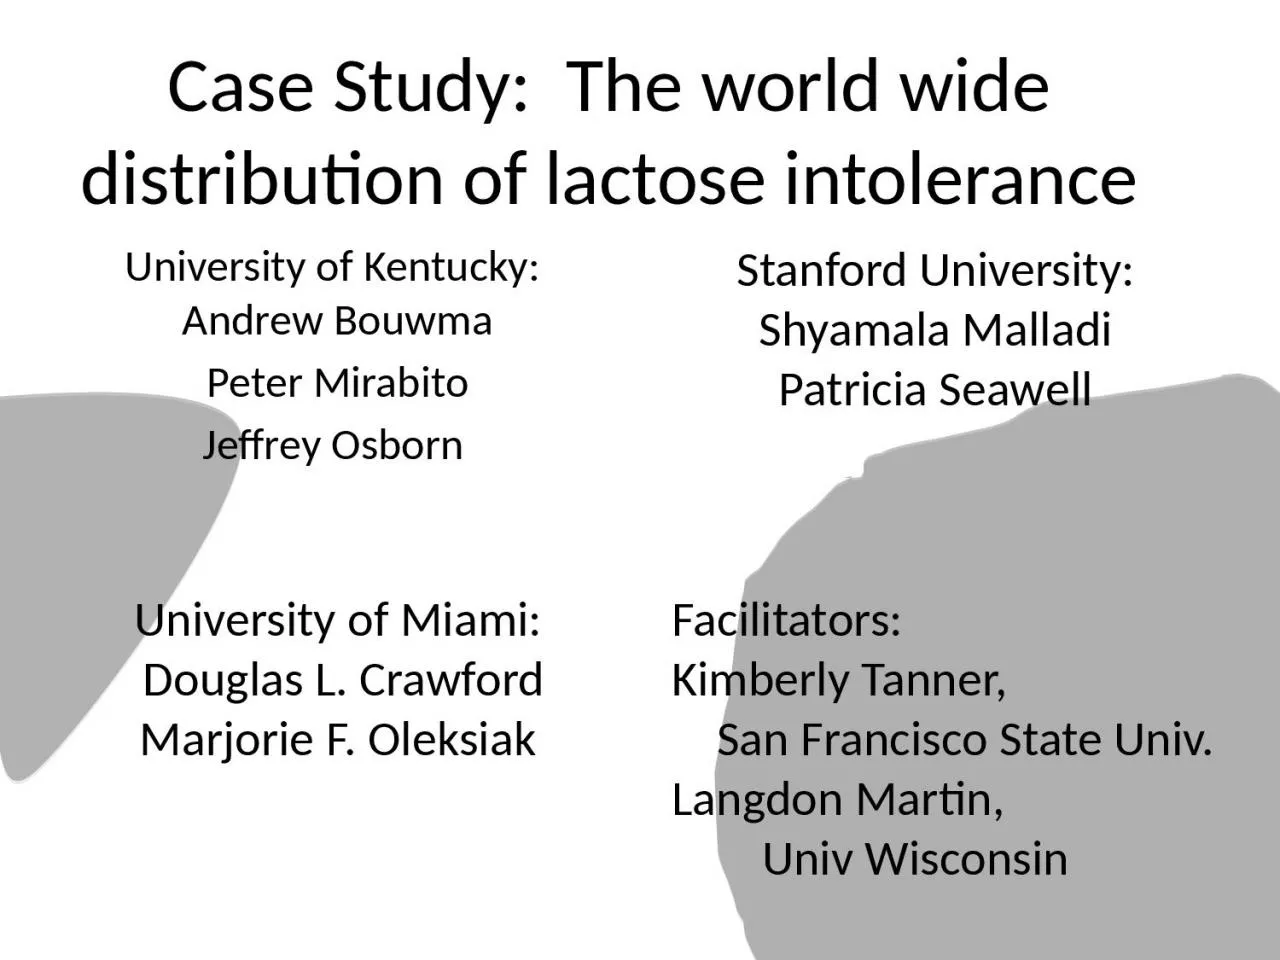 Case Study:  The world wide distribution of lactose intolerance